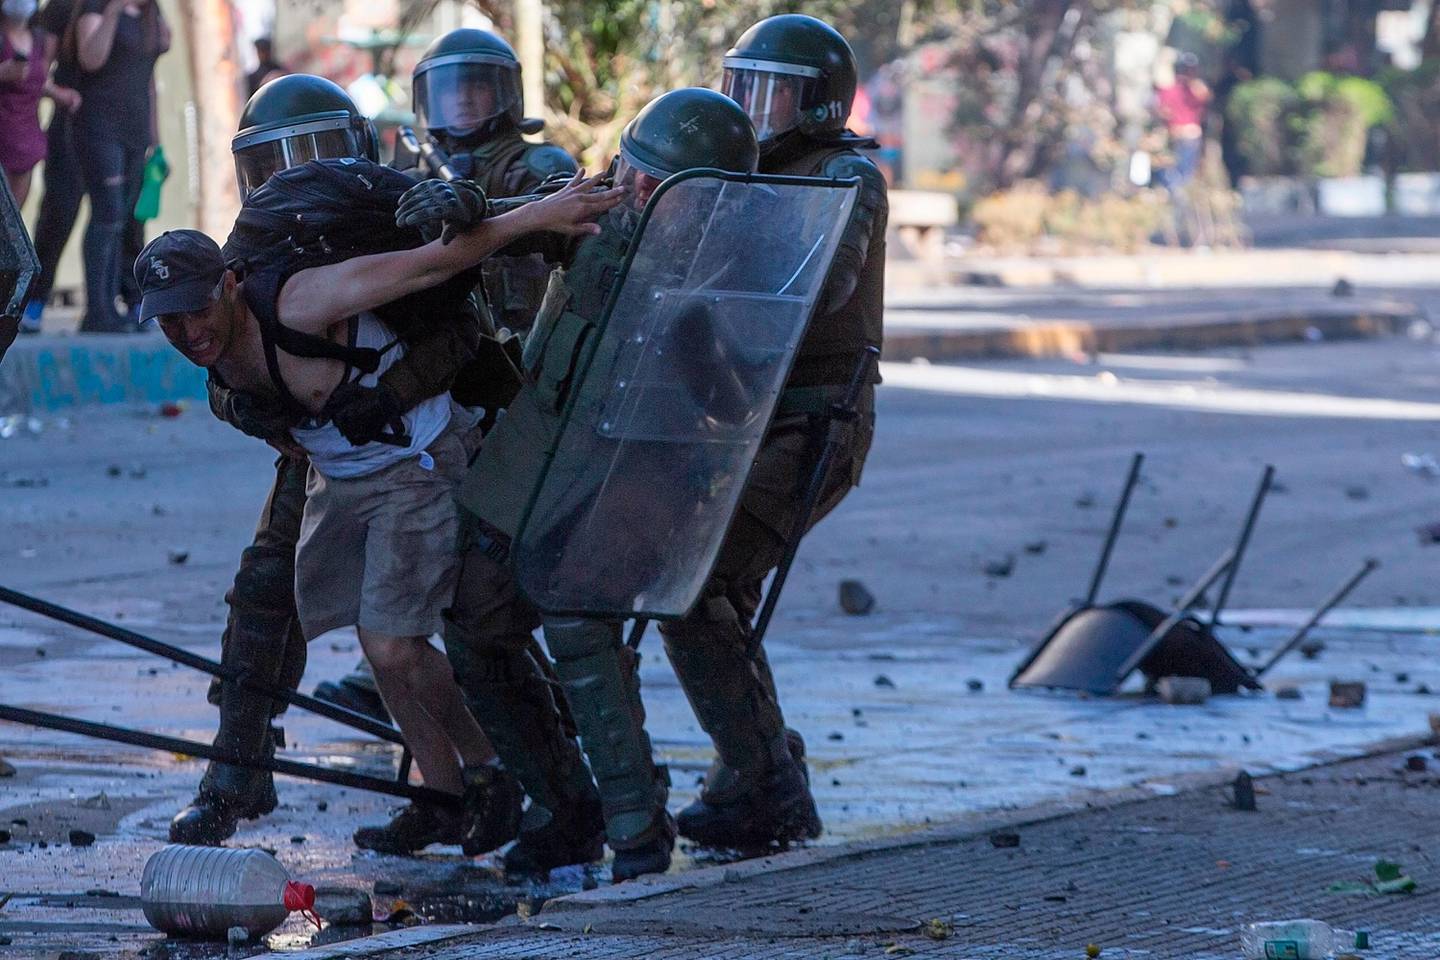 TOPSHOT - Riot police detain a demonstrator during clashes in Santiago on October 24, 2019 after a week of street violence which erupted against a now suspended metro fare hike but spiralled into general discontent. - A general strike in Chile went into its second day following a week of street protests for general discontent at low salaries and pensions, high costs of health care and education, and a yawning gap between rich and poor, that left 18 dead. (Photo by Claudio REYES / AFP)